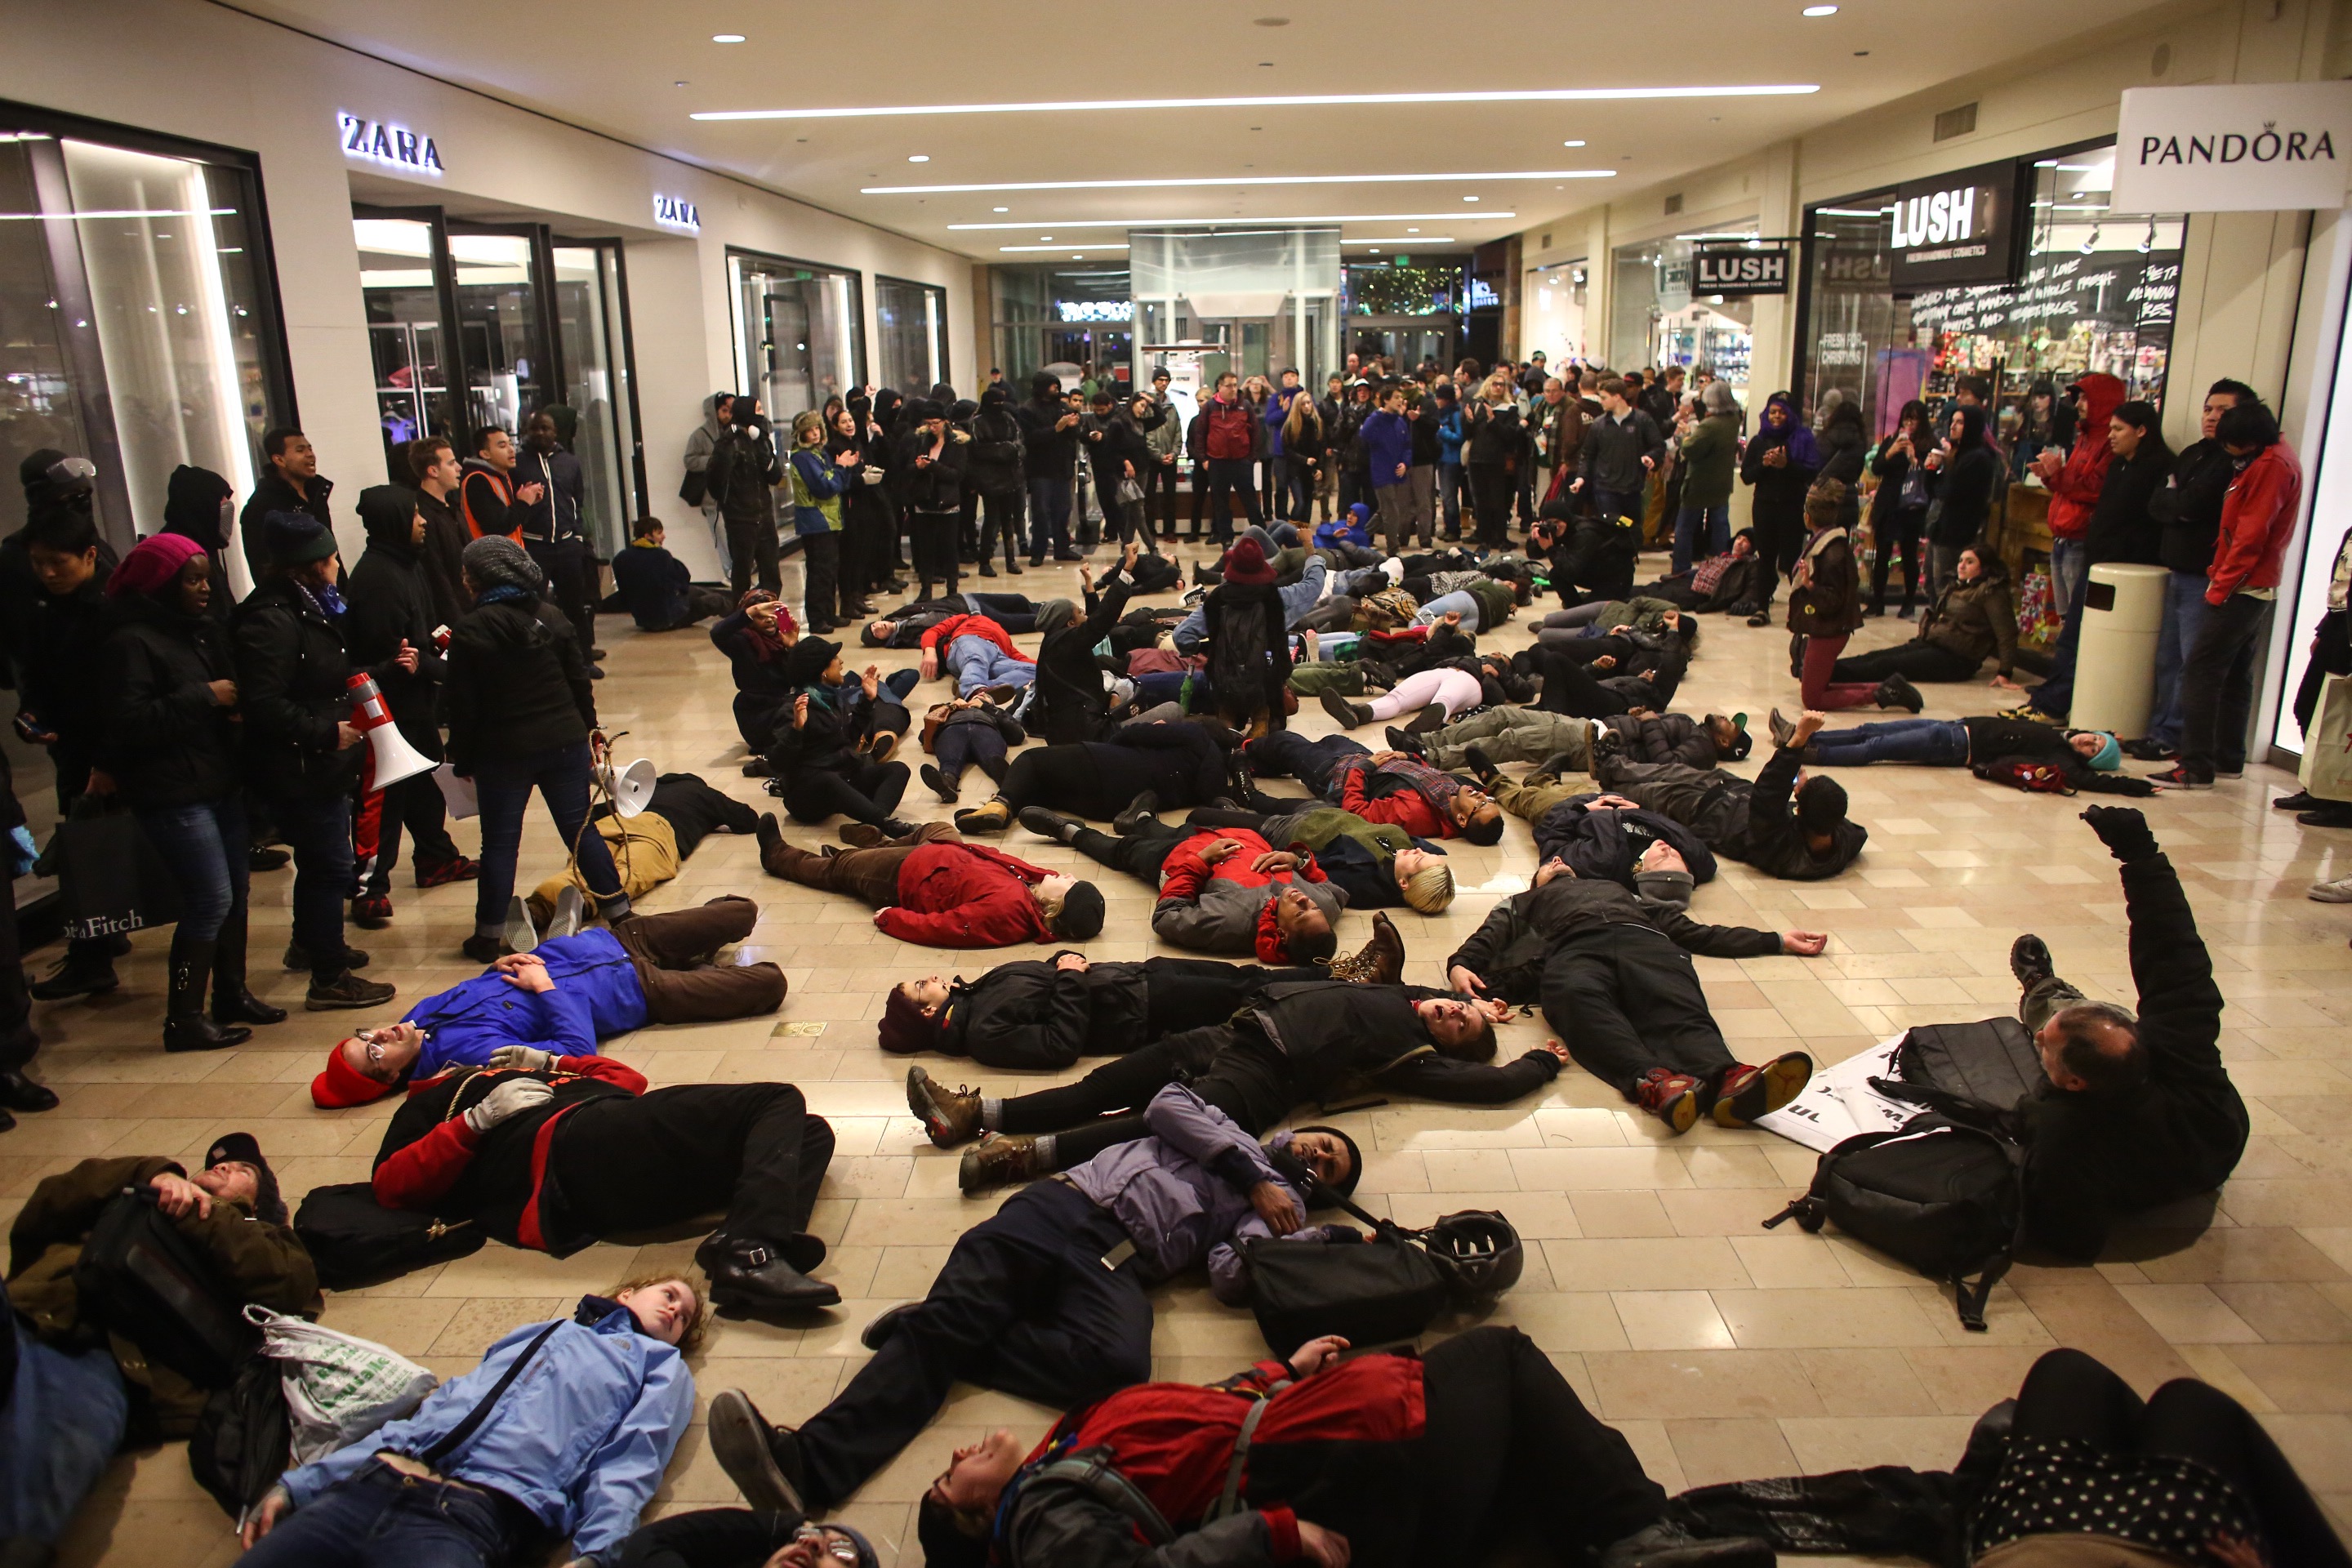 to protest the Ferguson grand jury decision. More than 200 protesters ...